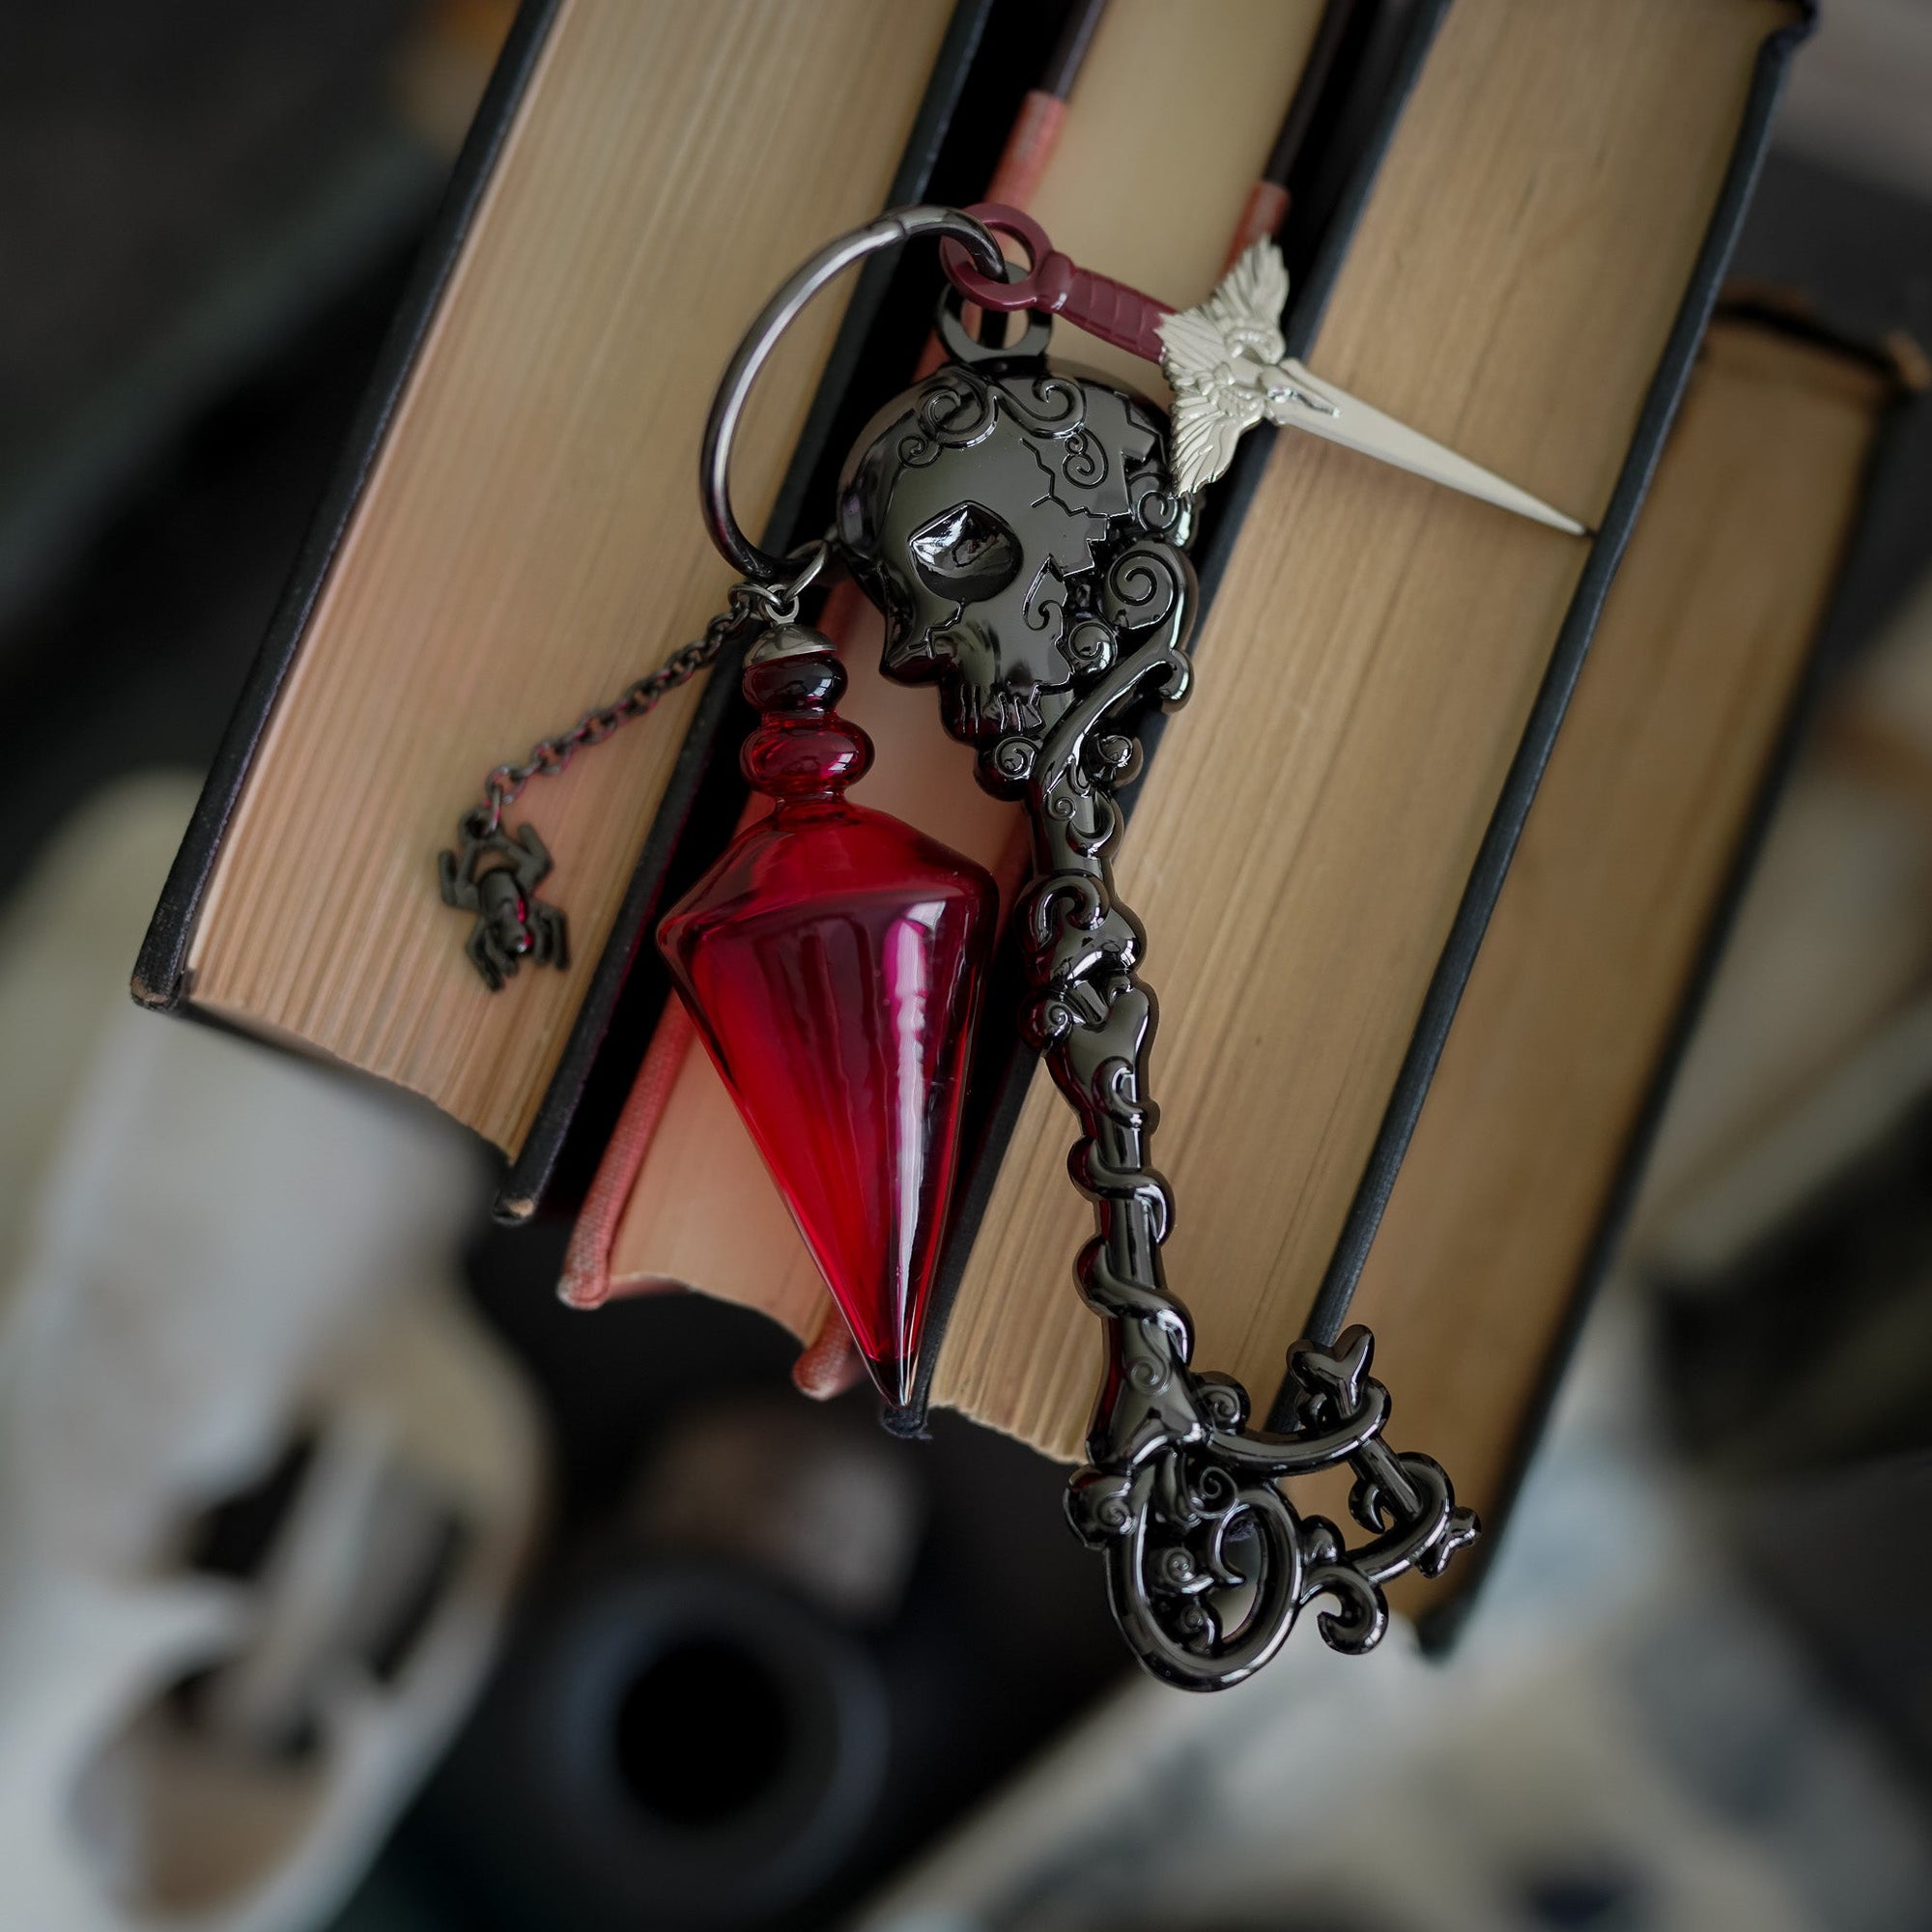 The Red Church Key from Nevernight with skull design and two deadly charms: Mia's gravebone dagger and a red vial of poison.